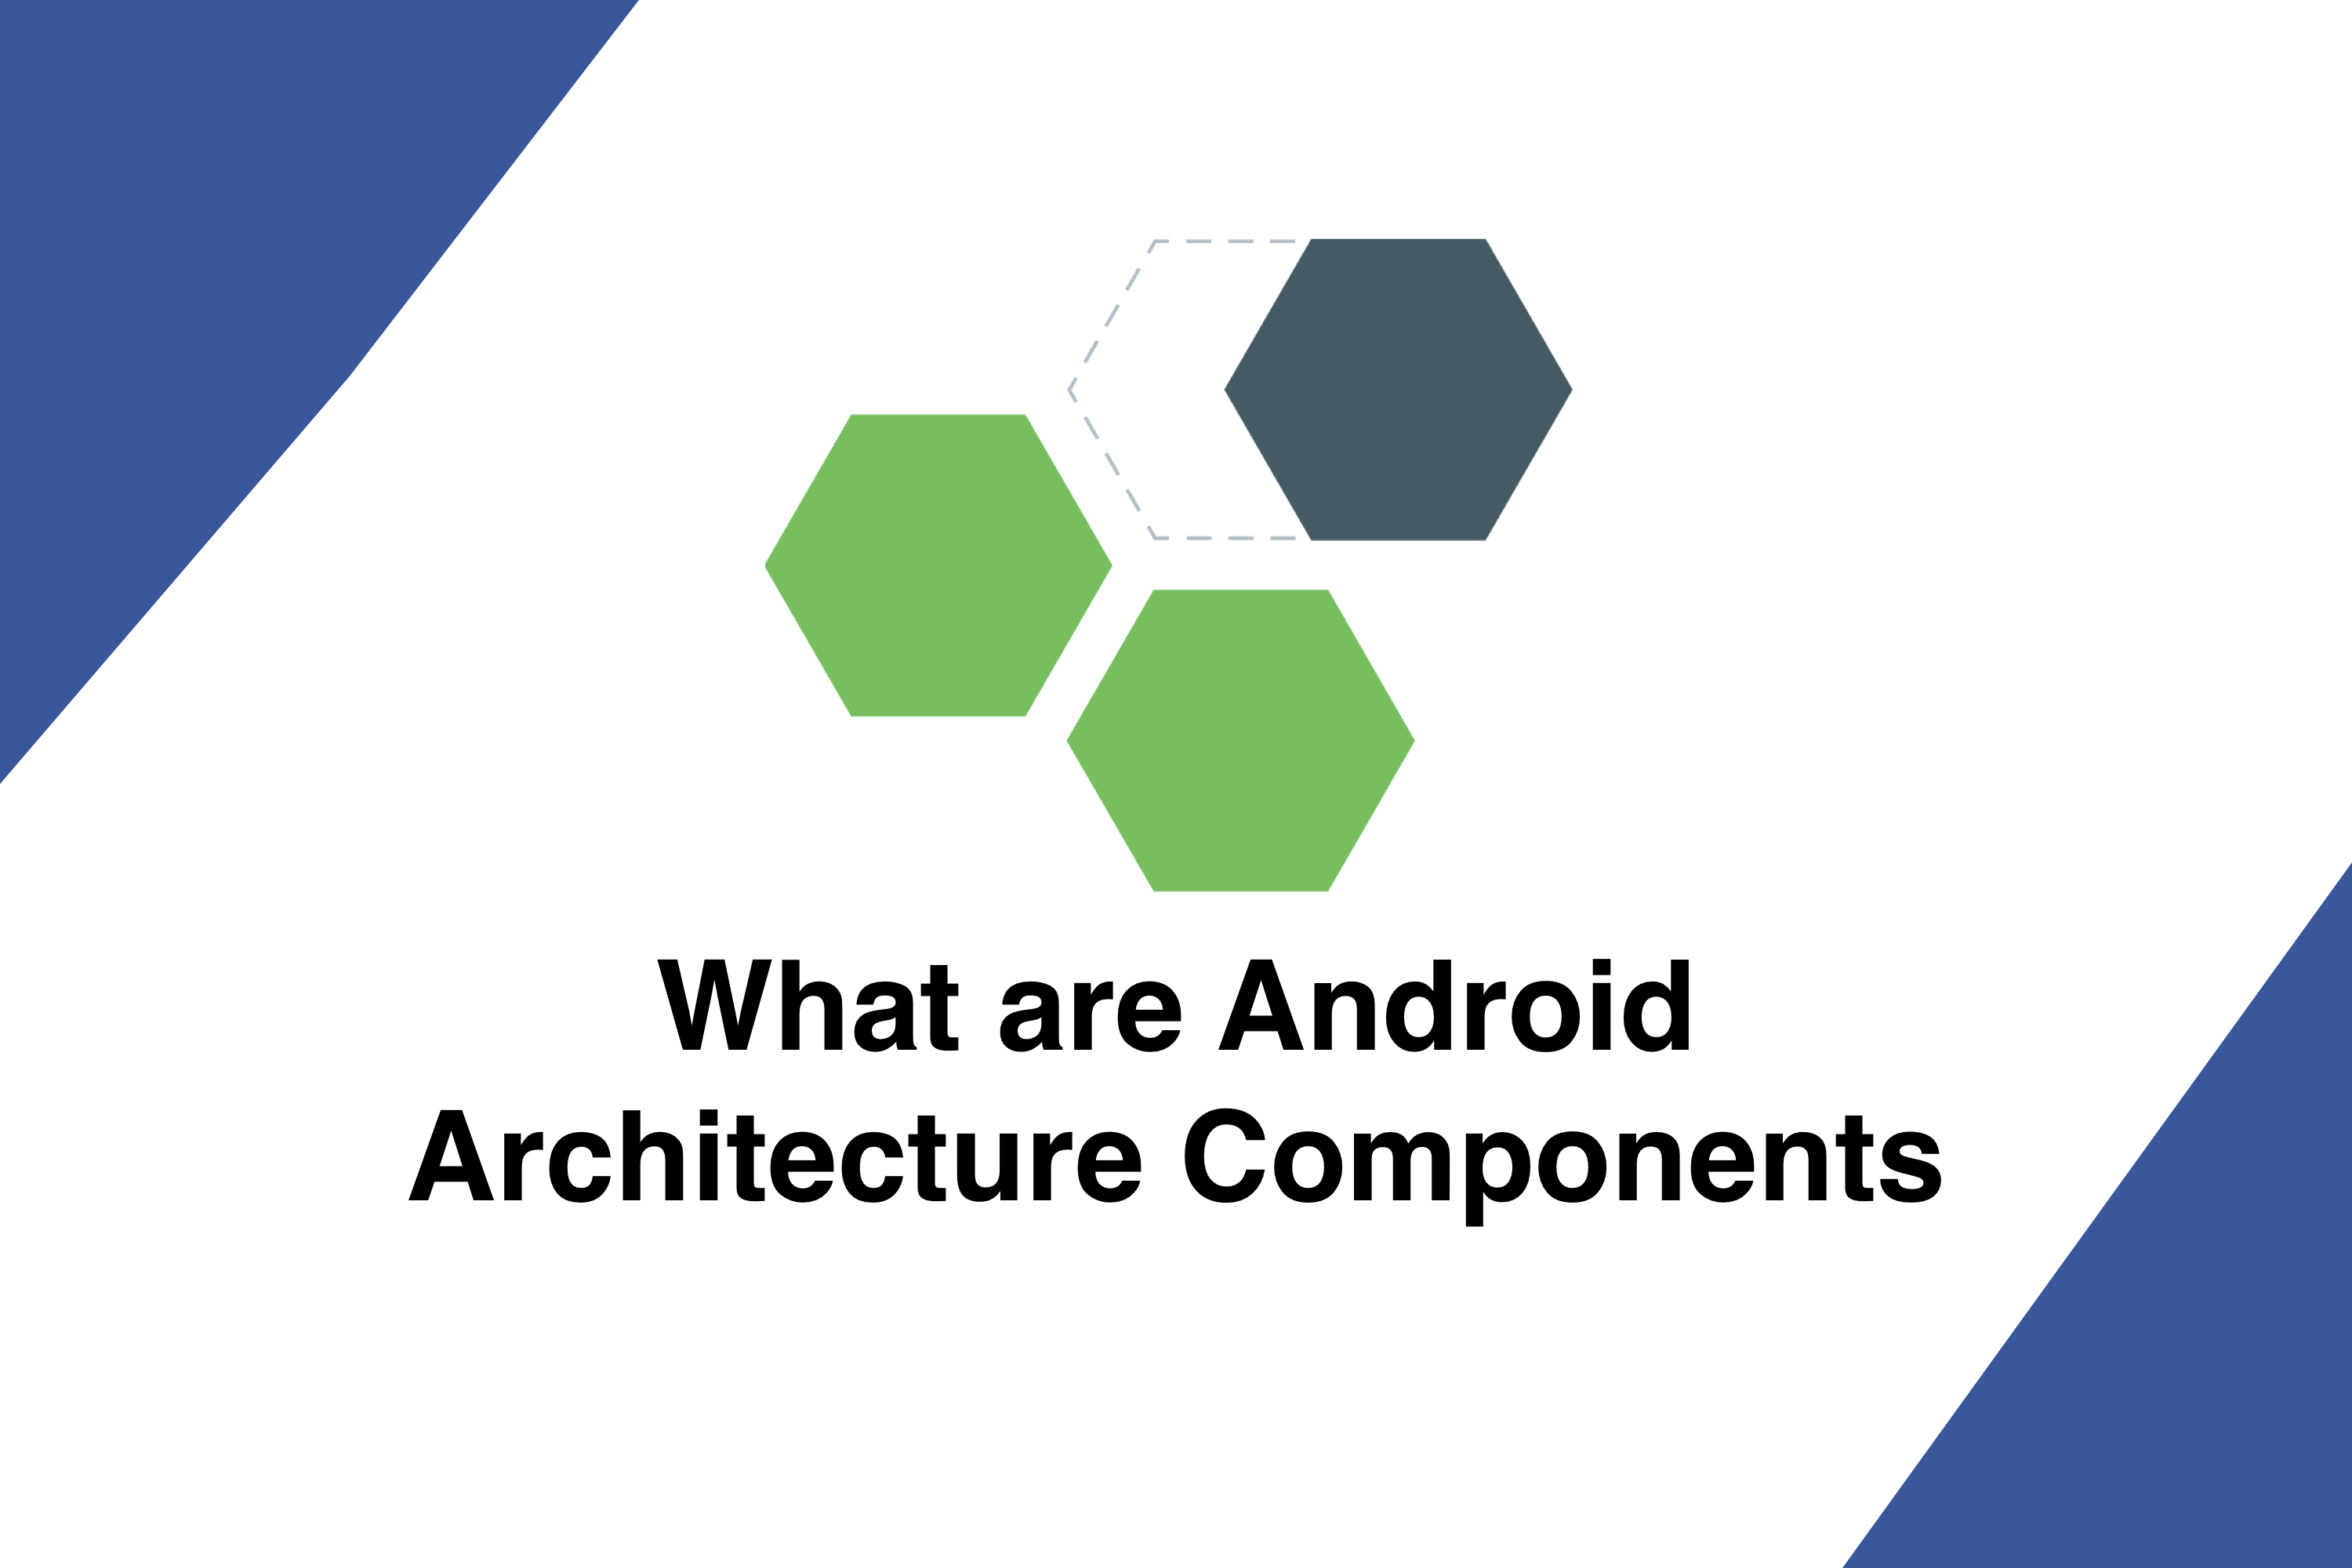 What are Android Architecture Components?